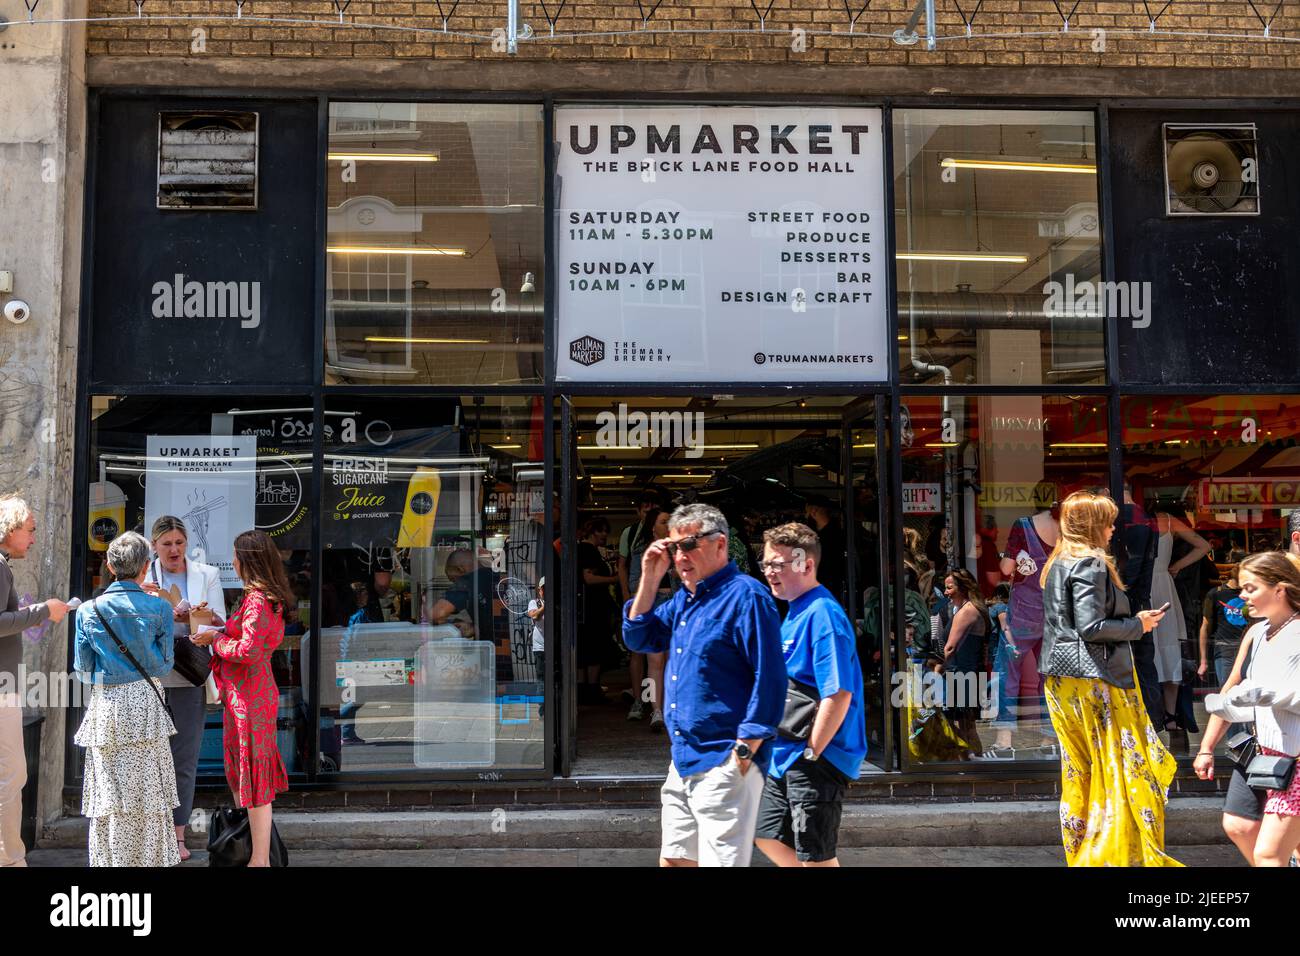 London. UK-06.26.2022. The sign and entrance of Upmarket in Brick Lane which attract a large crowd of tourists and visitor to its popular food stalls. Stock Photo